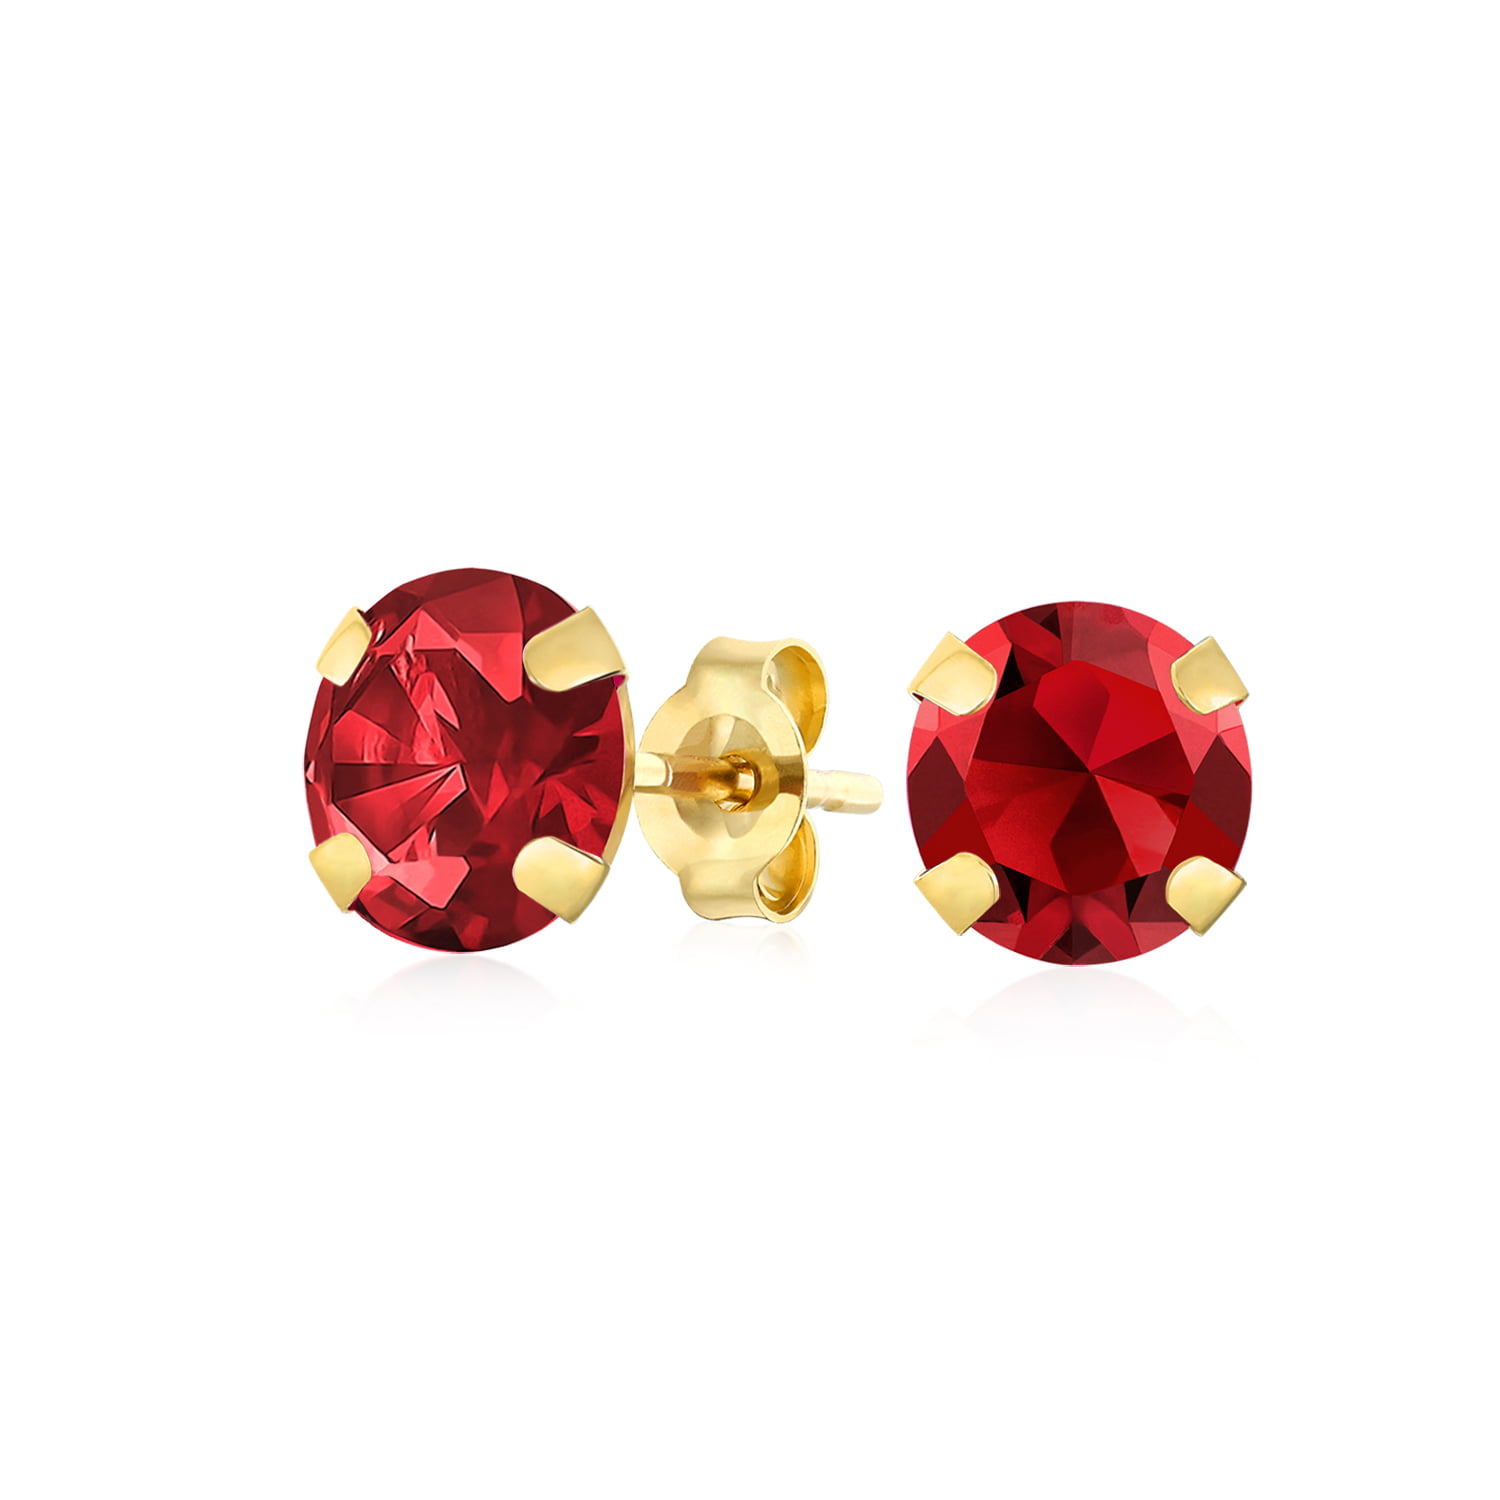 6mm ROUND FACETED DEEP RED GENUINE GARNET 9k 9ct YELLOW GOLD STUD EARRING